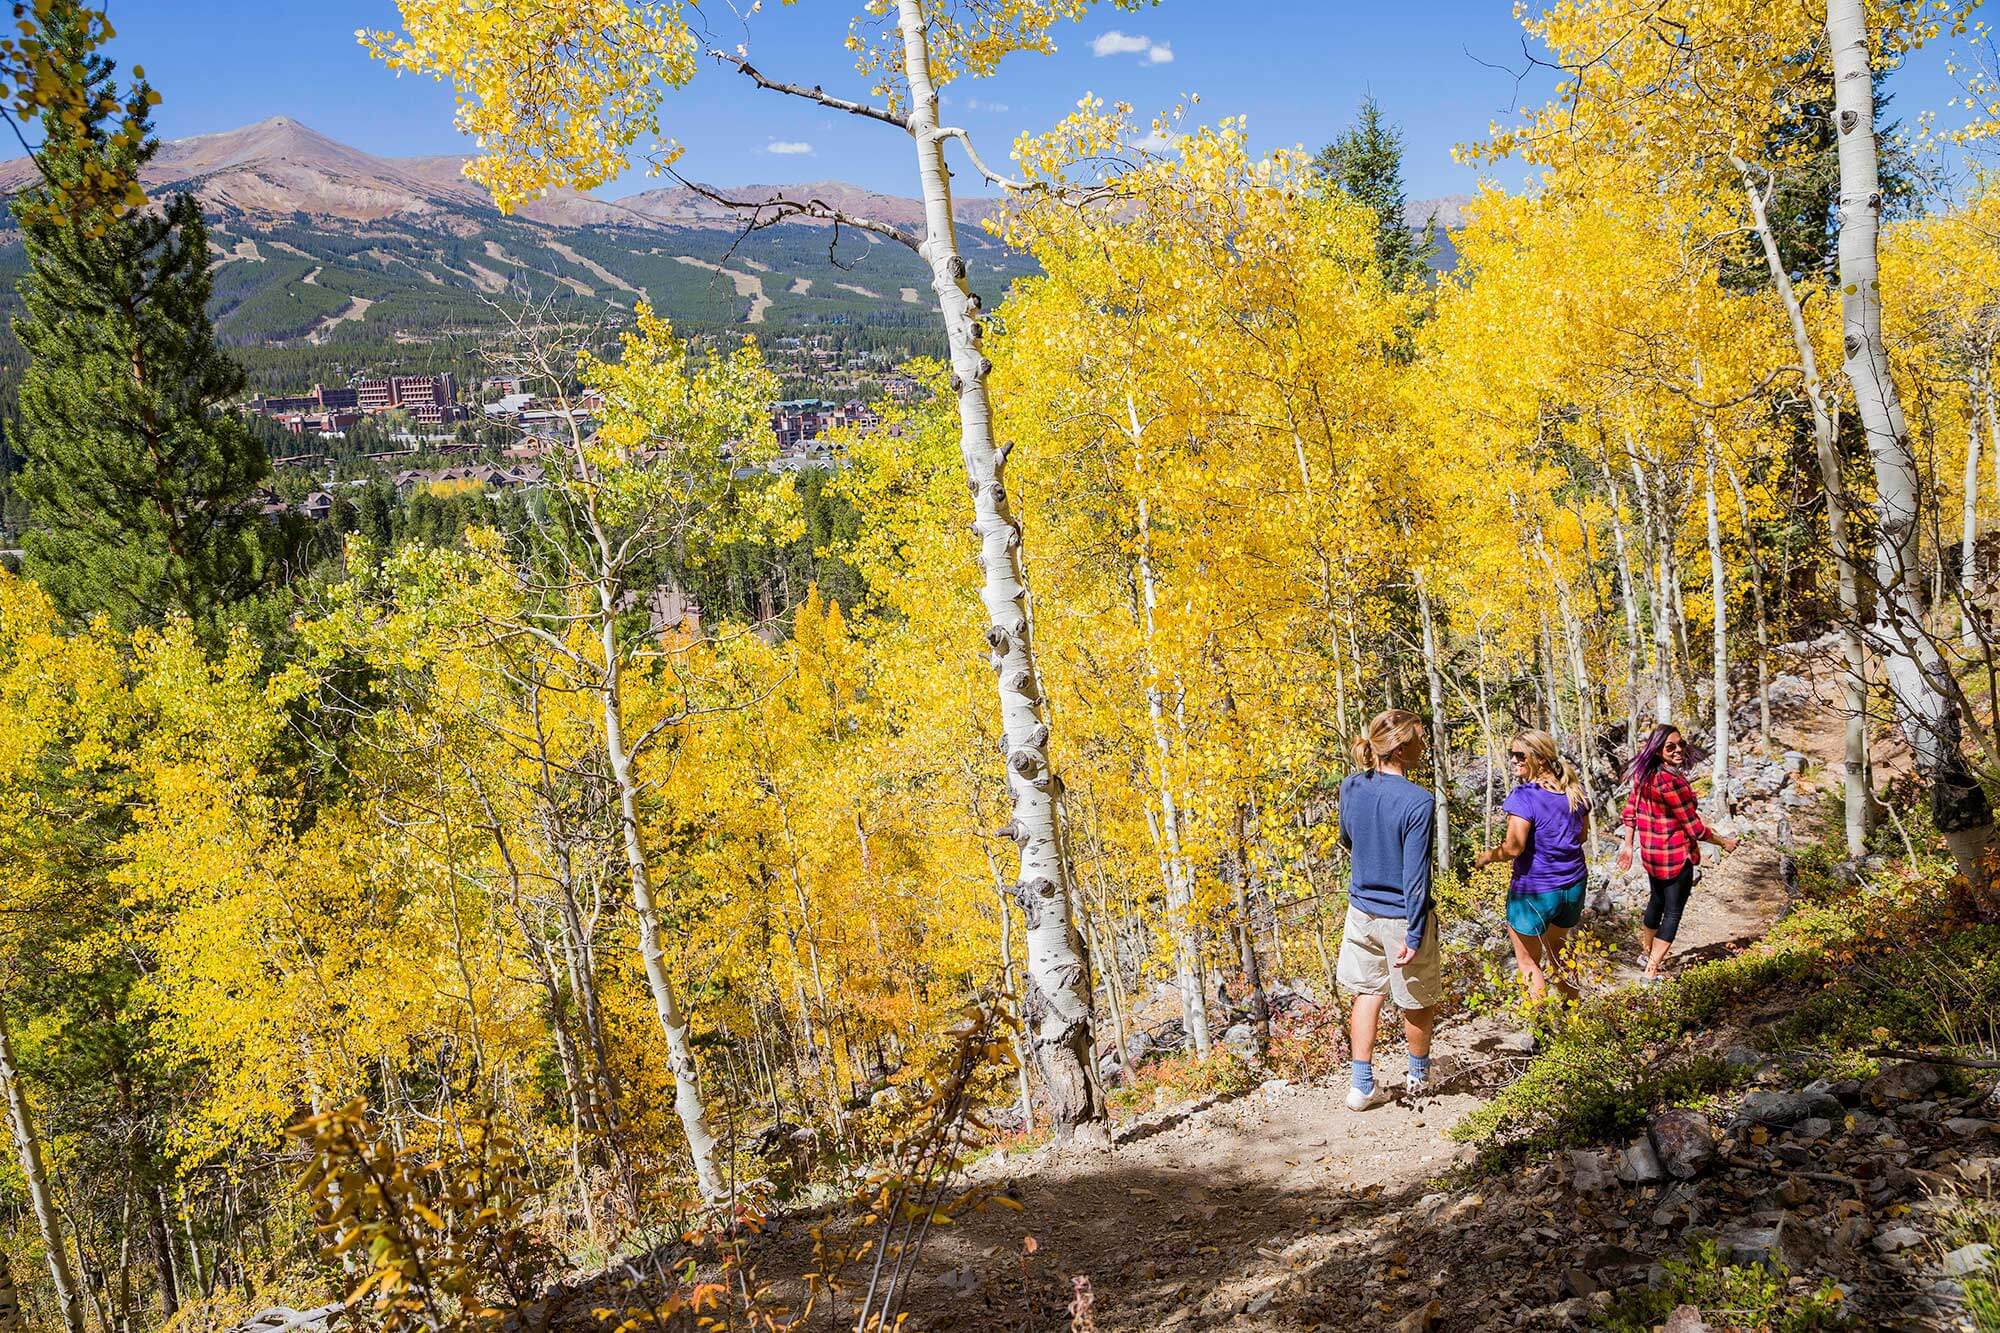 Friends on a fall hike with aspen and mountain views in Breckenridge, CO